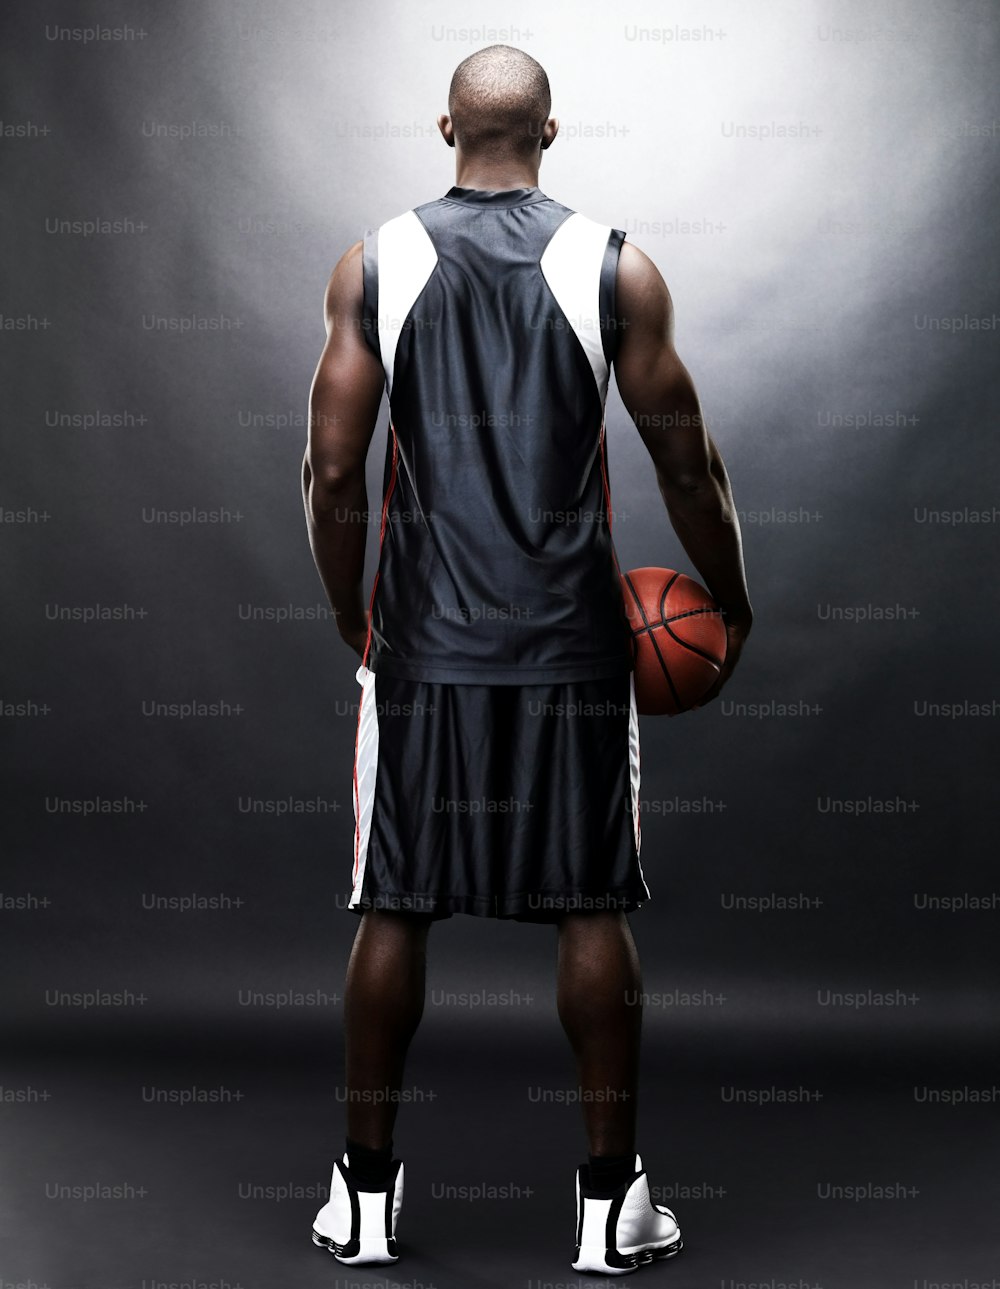 a man holding a basketball standing in front of a dark background